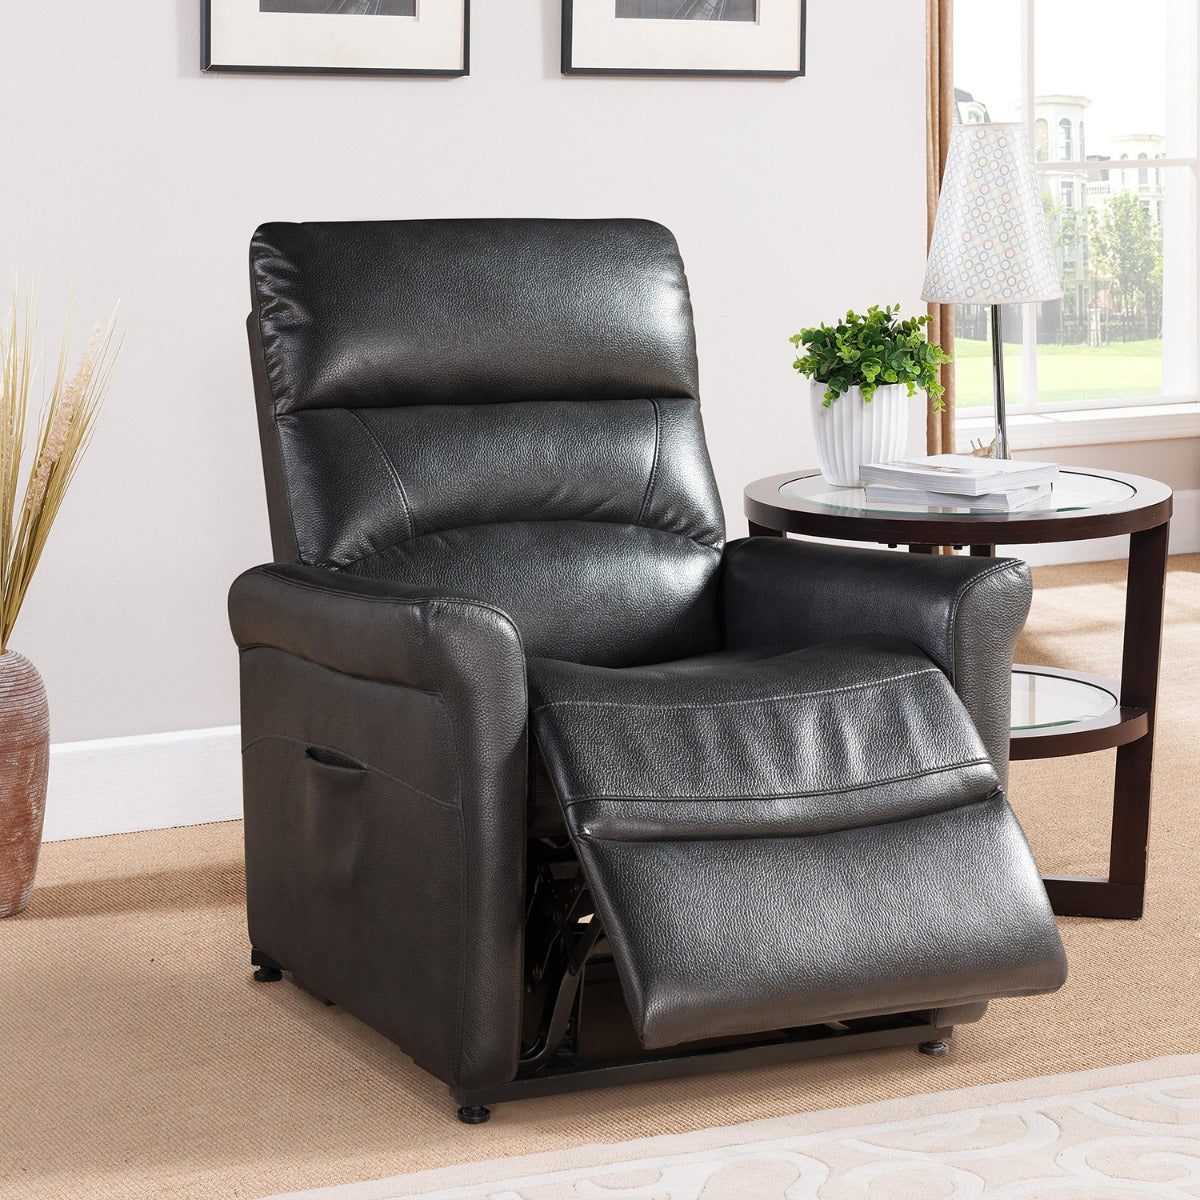 Colby Power Lift Recliner - Help Sitting Up or Down